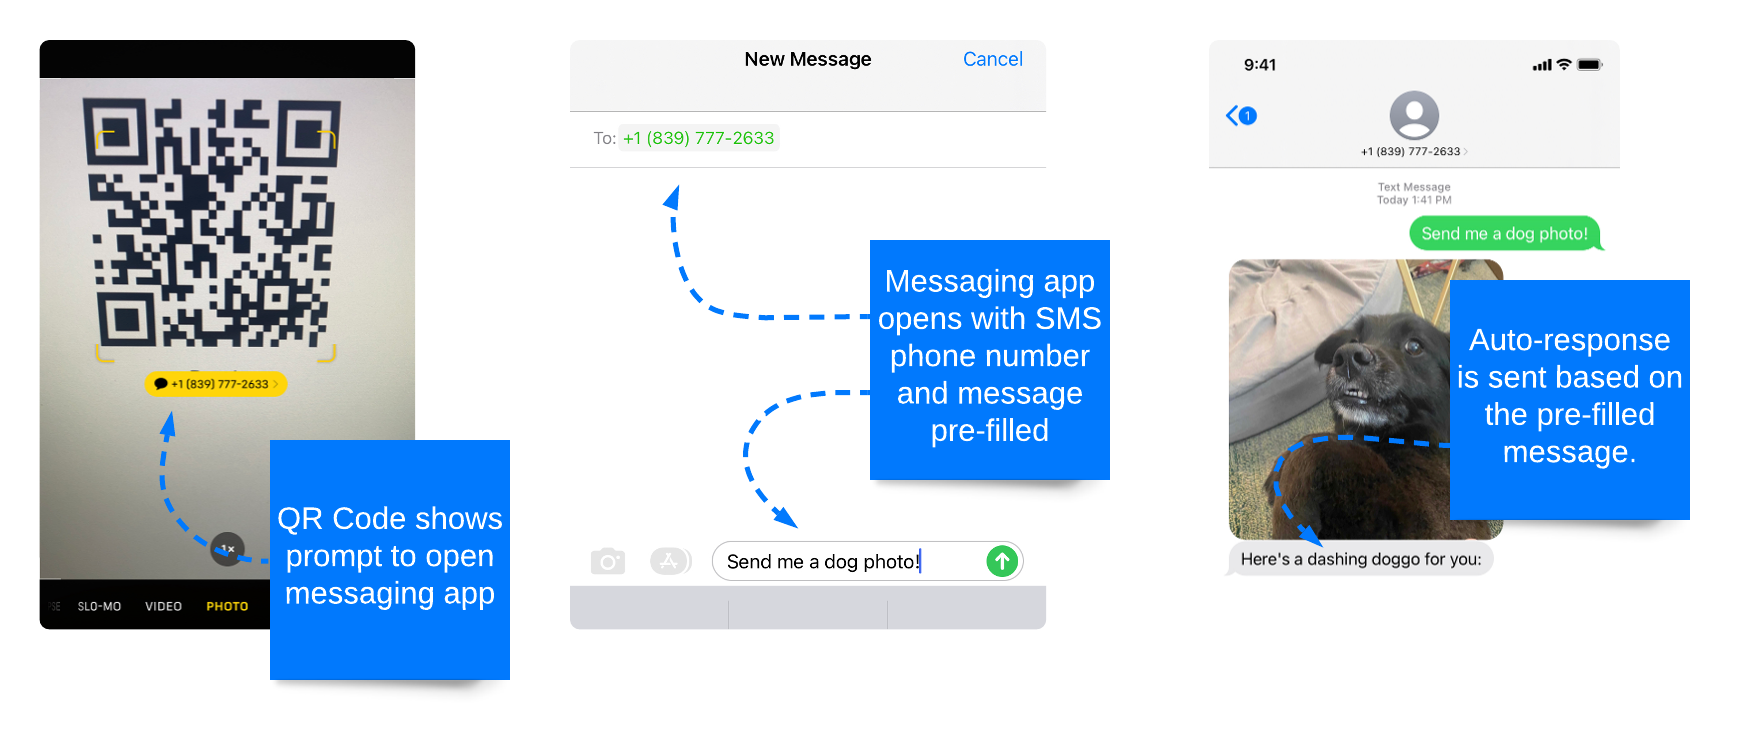 Image showing the steps of the interactive demo: 1) QR Code shows prompt to open messaging app, 2) Messaging app opens with phone number and message pre-filled, 3) Auto-response is sent based on the pre-filled message.